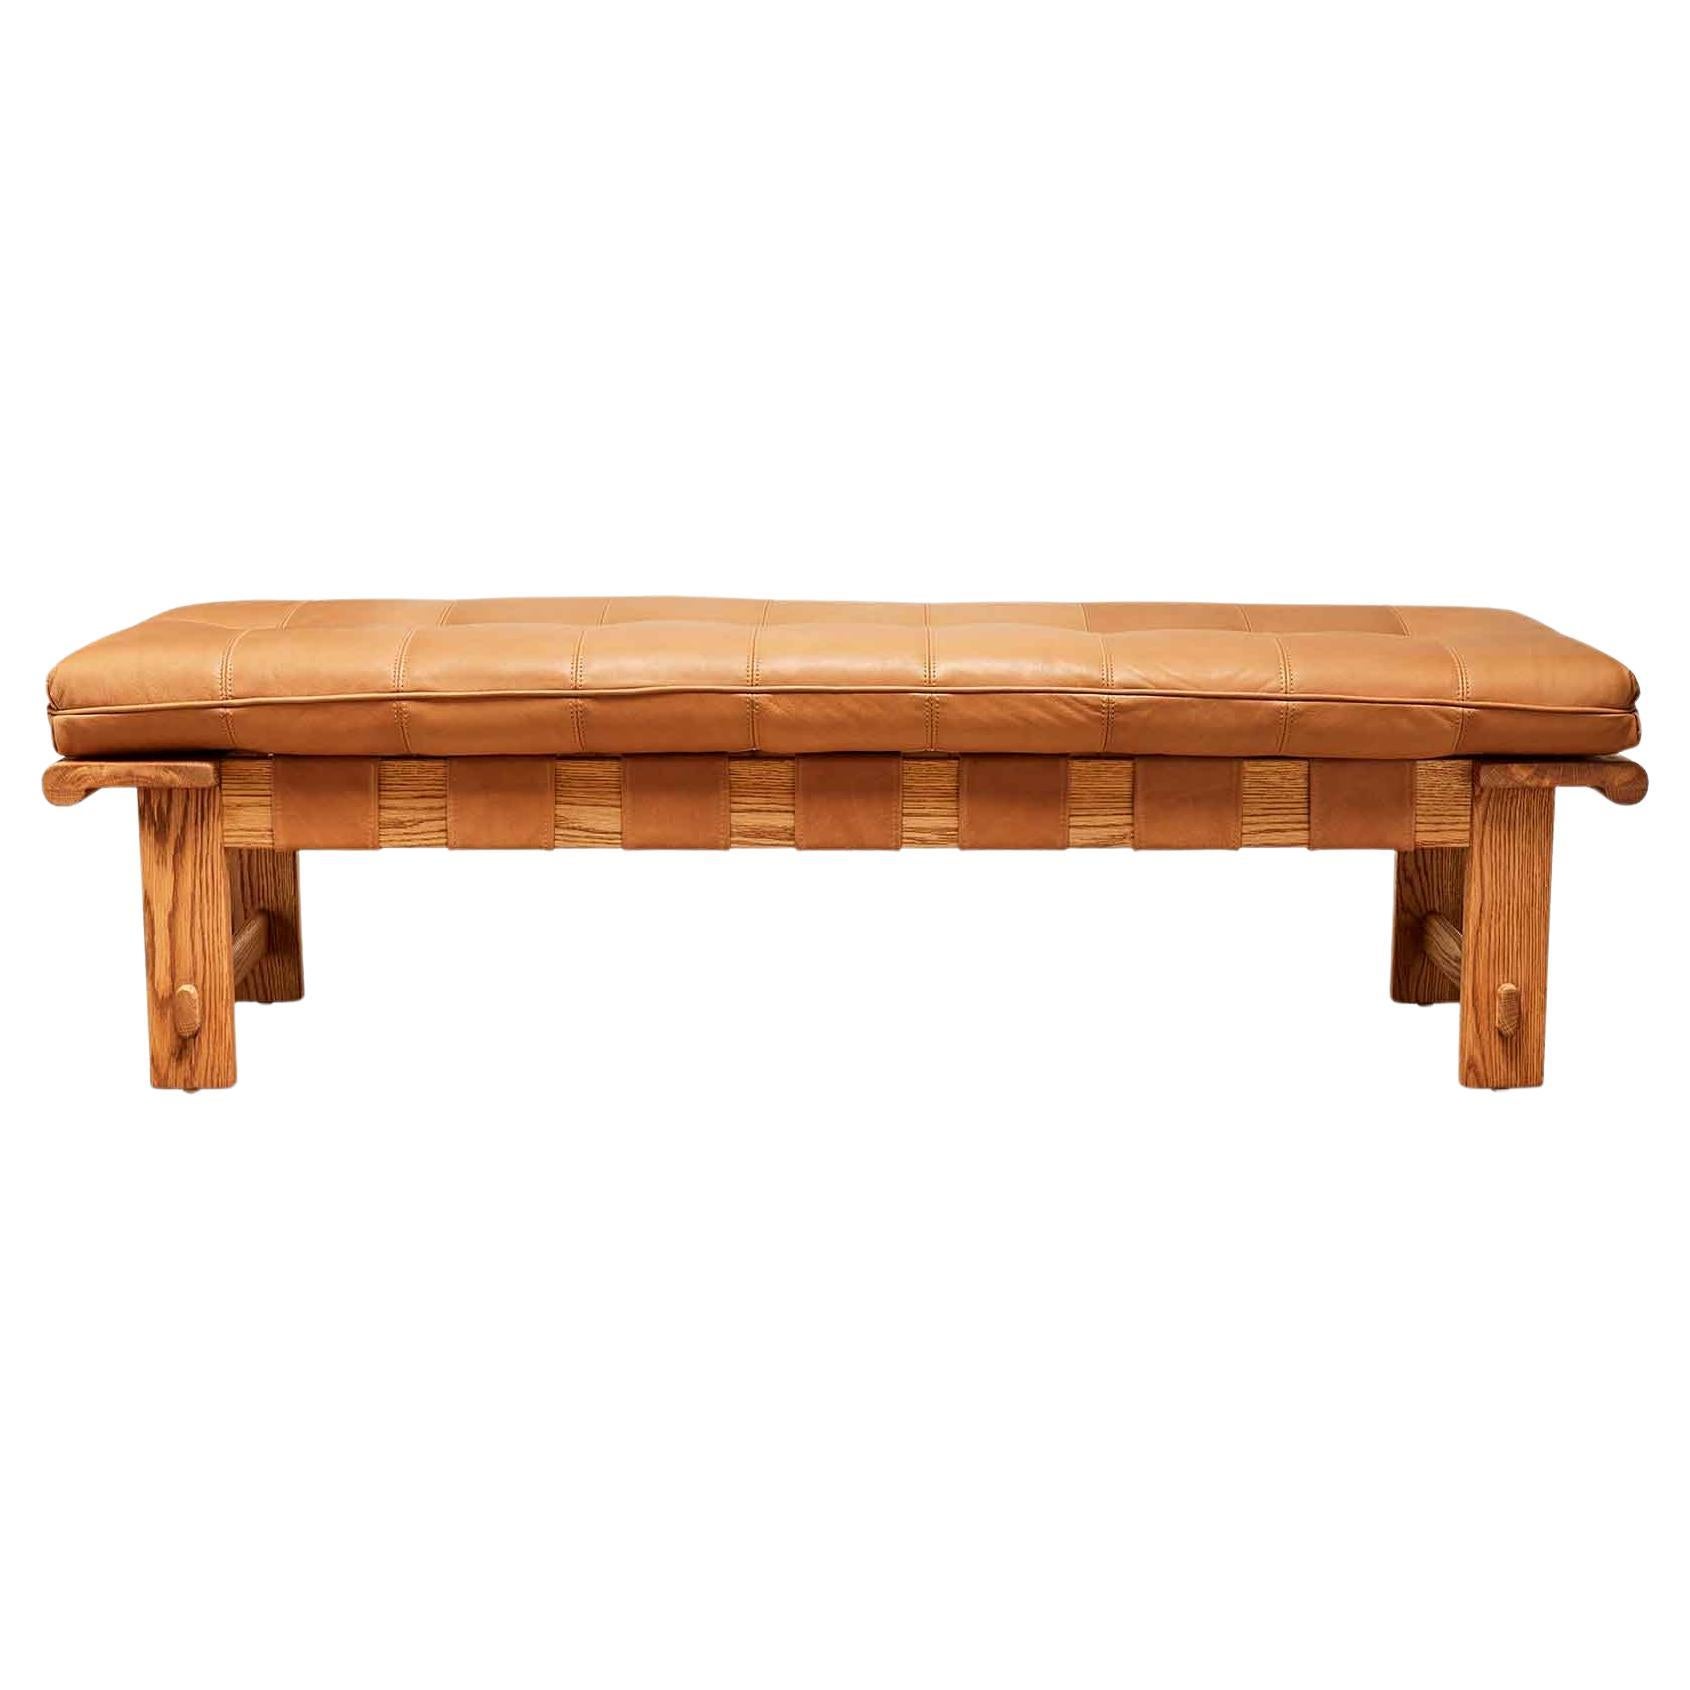 Oak and Tan Leather Ojai Bench by Lawson-Fenning